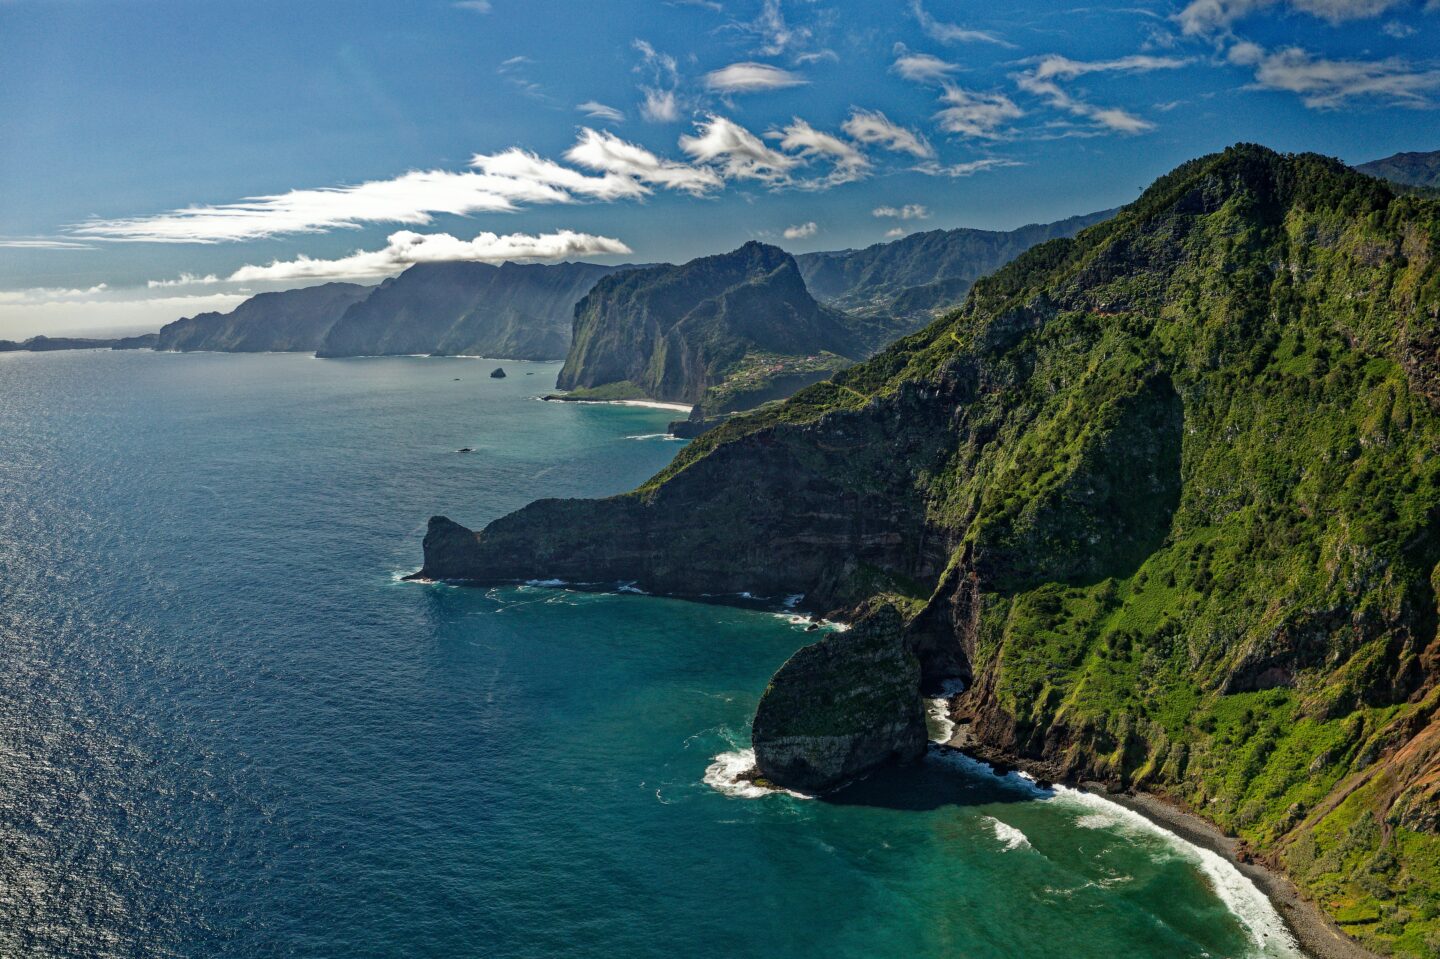 Ariel view of the coast of madeira showcasing the deep blue ocean meeting the dramatic, lush, green, mountain coastline with blue sky